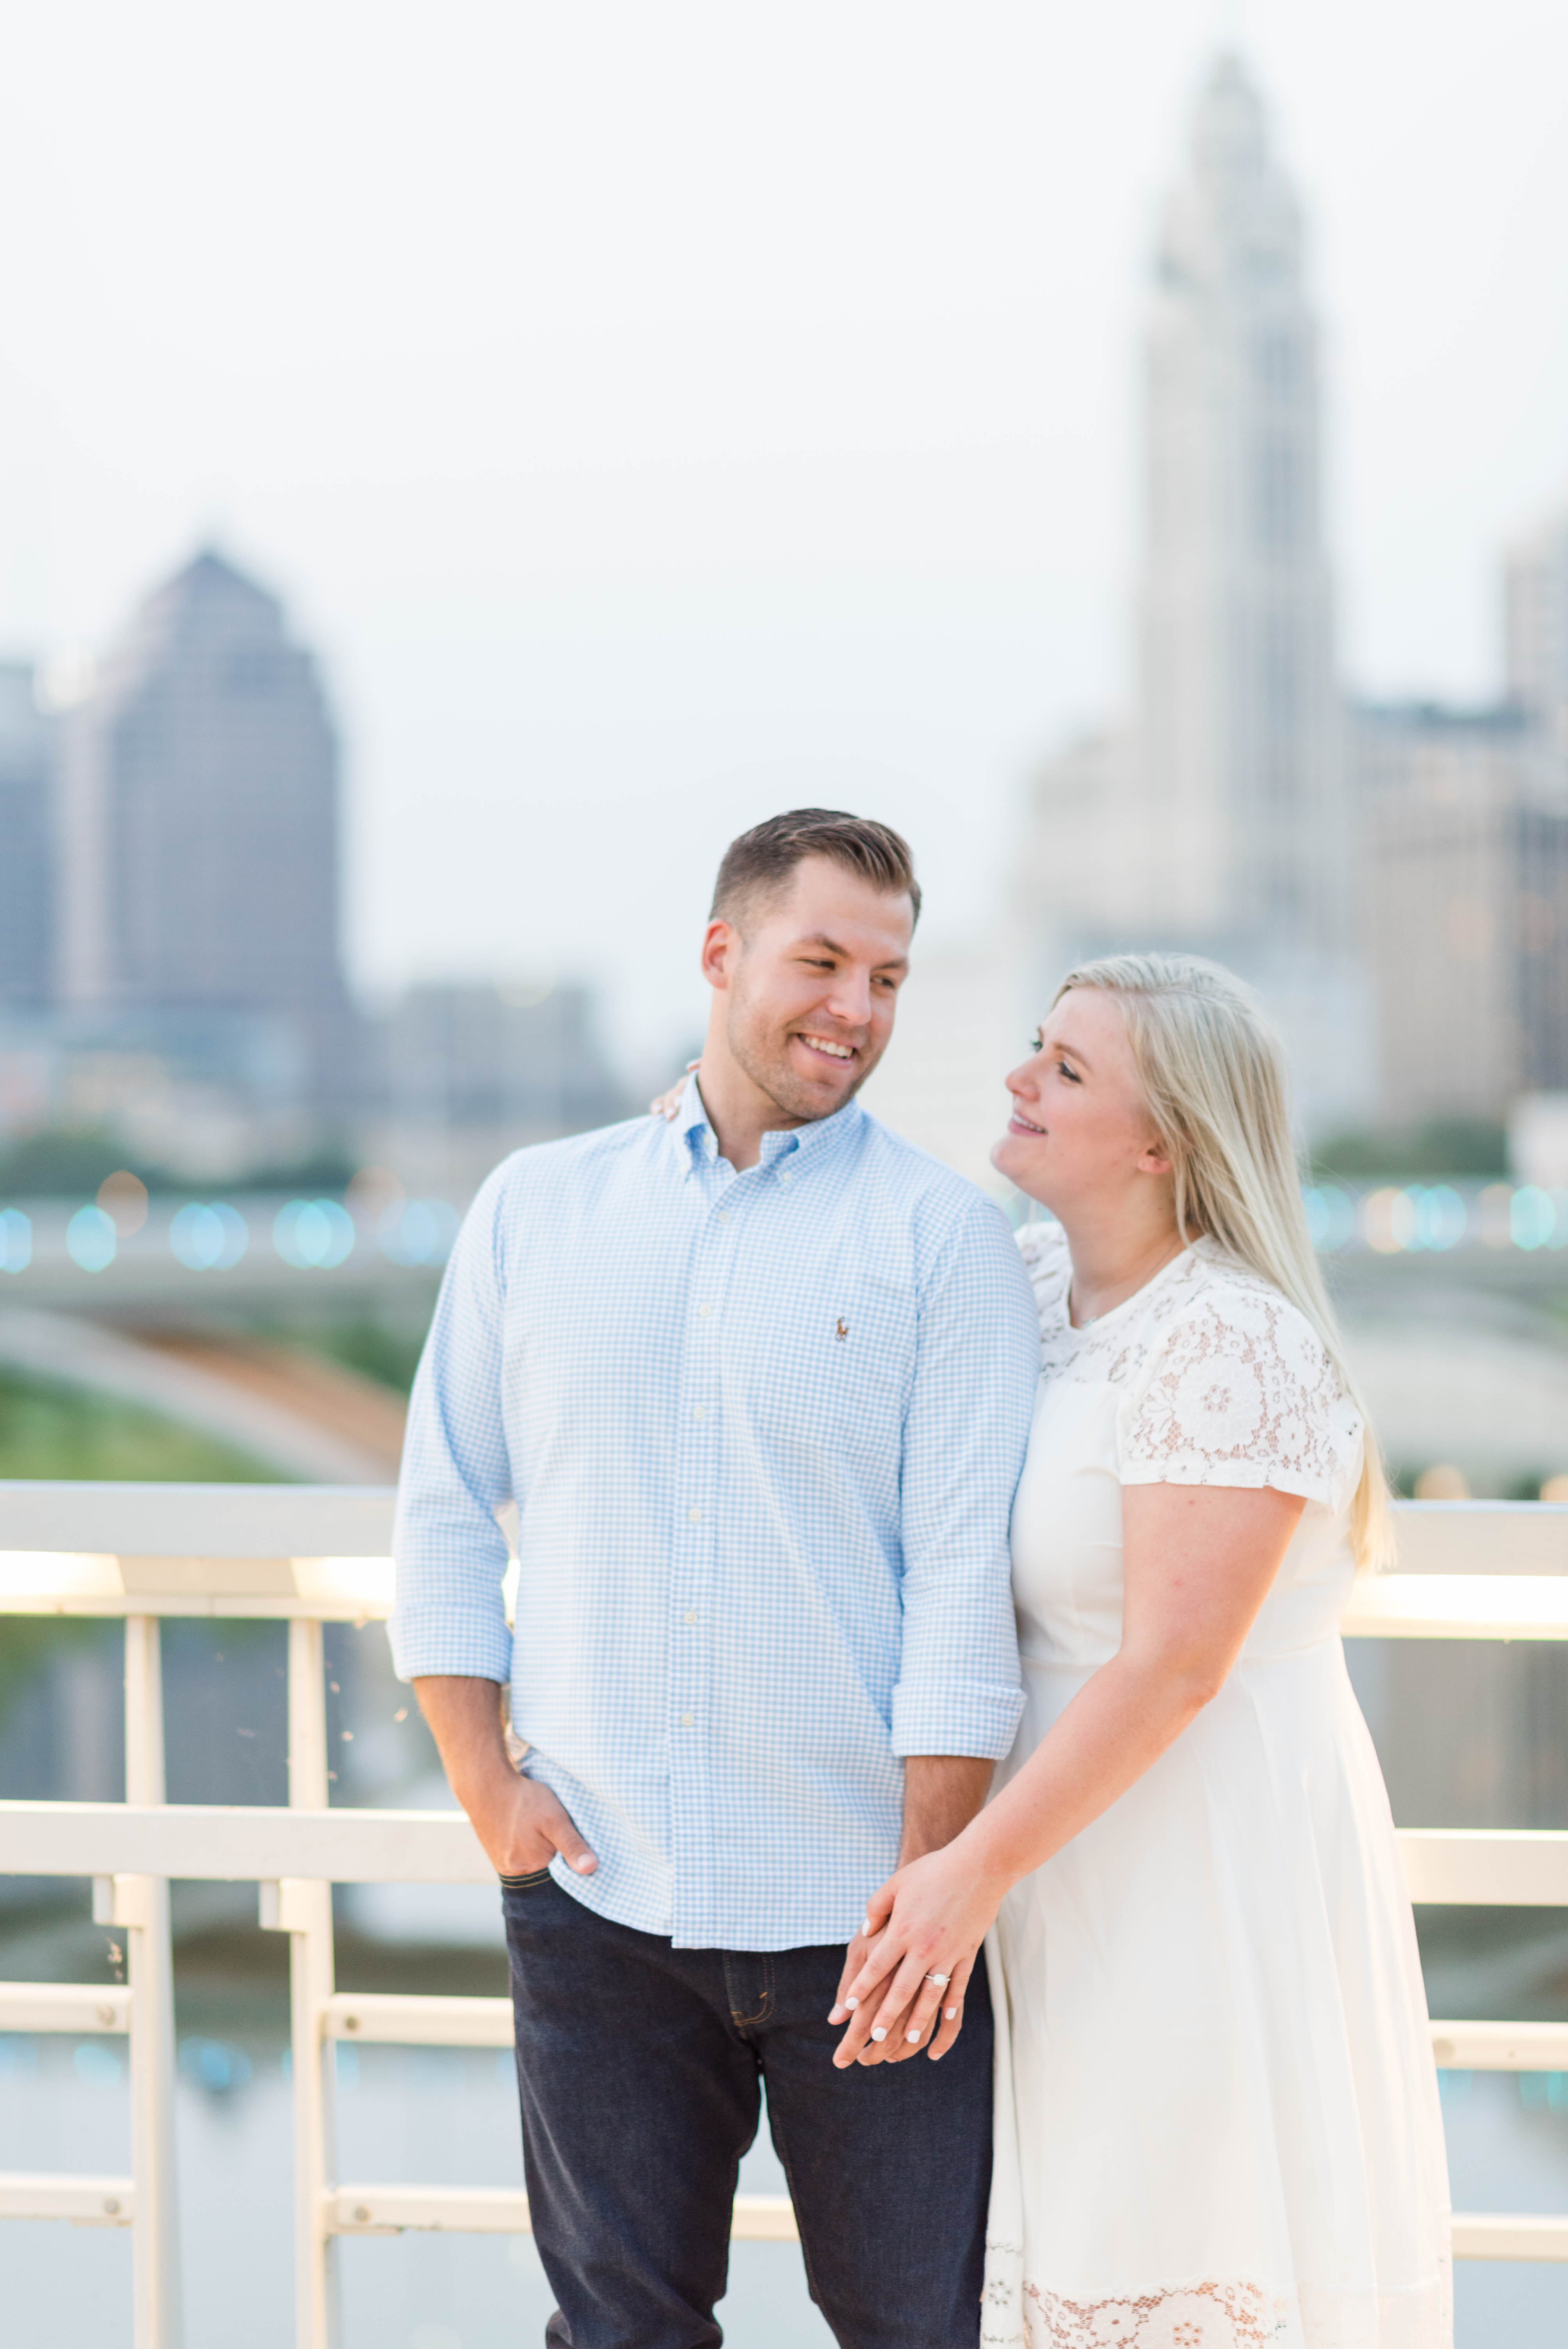 Engagement Session At The Scioto Mile & Bicentennial Park - Sweet Williams Photography, Rebecca Musayev